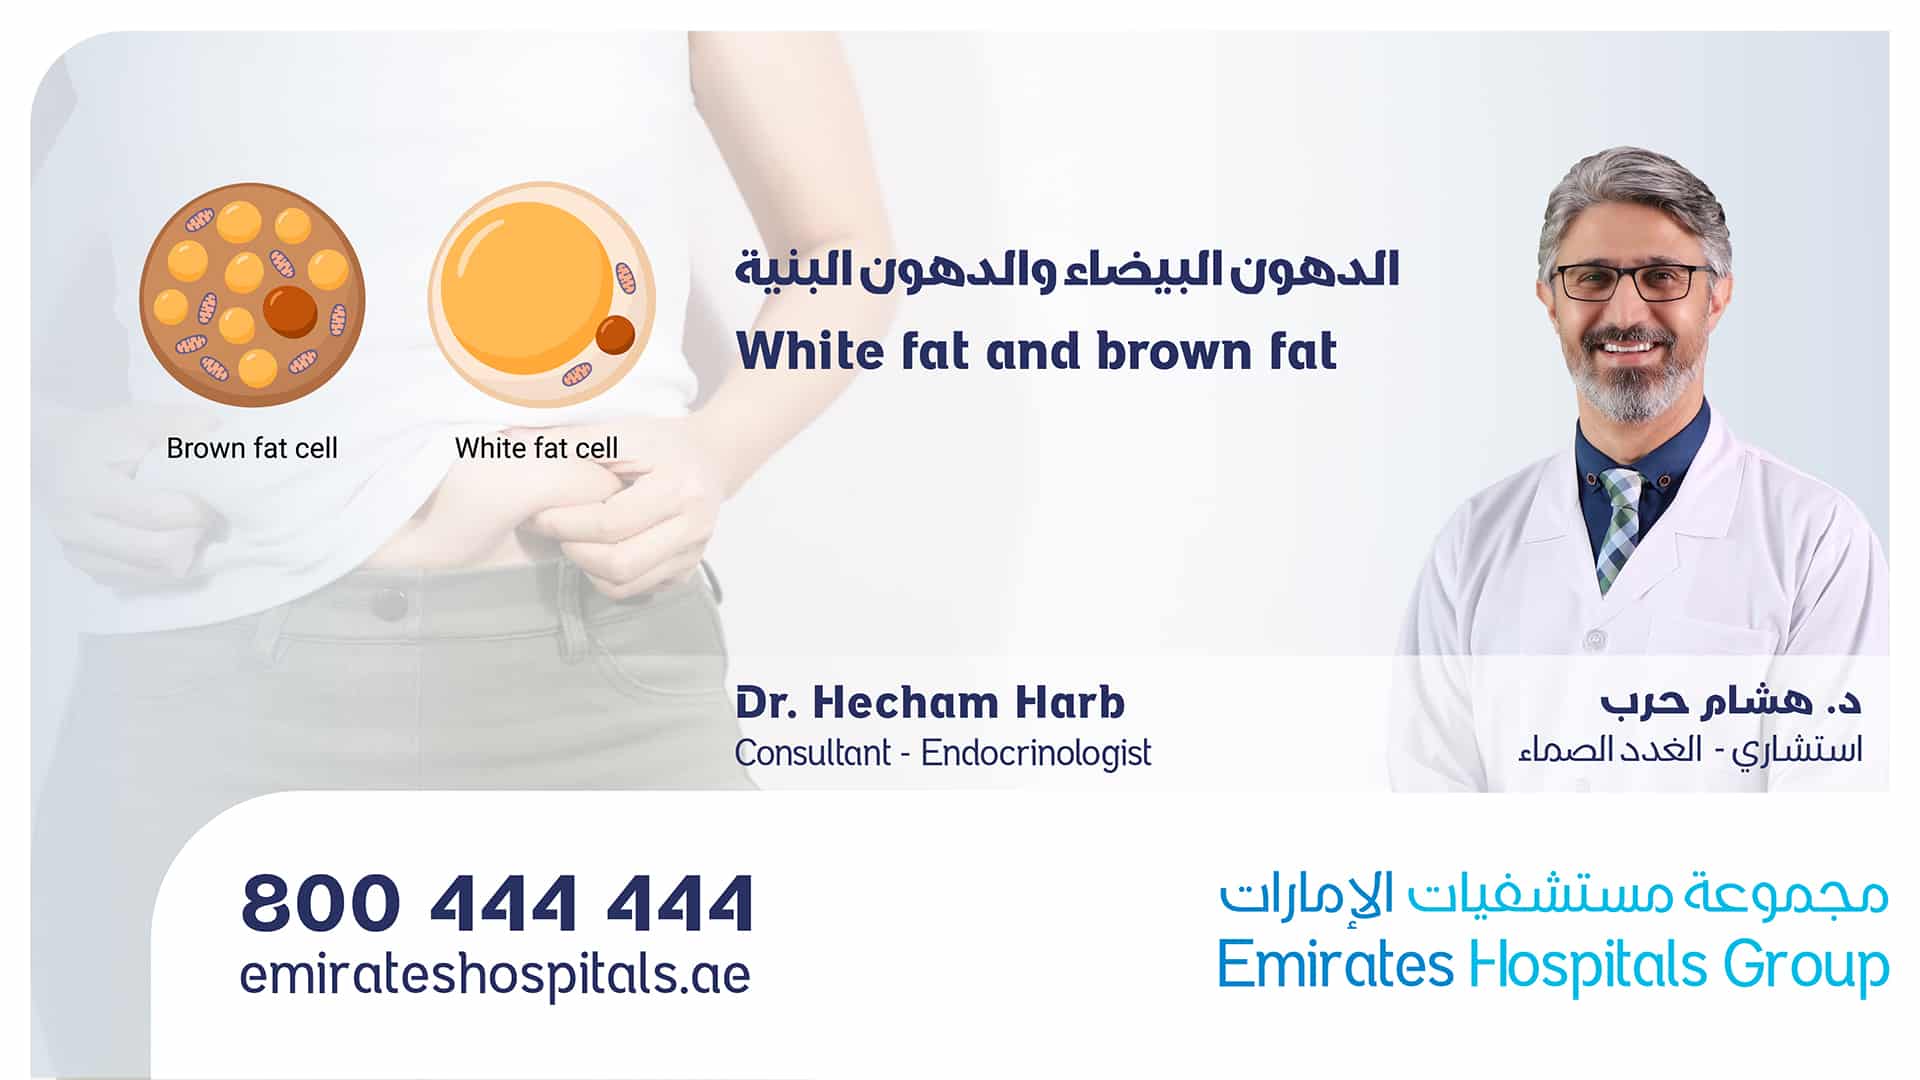 White fat and brown fat - Dr. Hecham Harb Consultant Endocrinologist